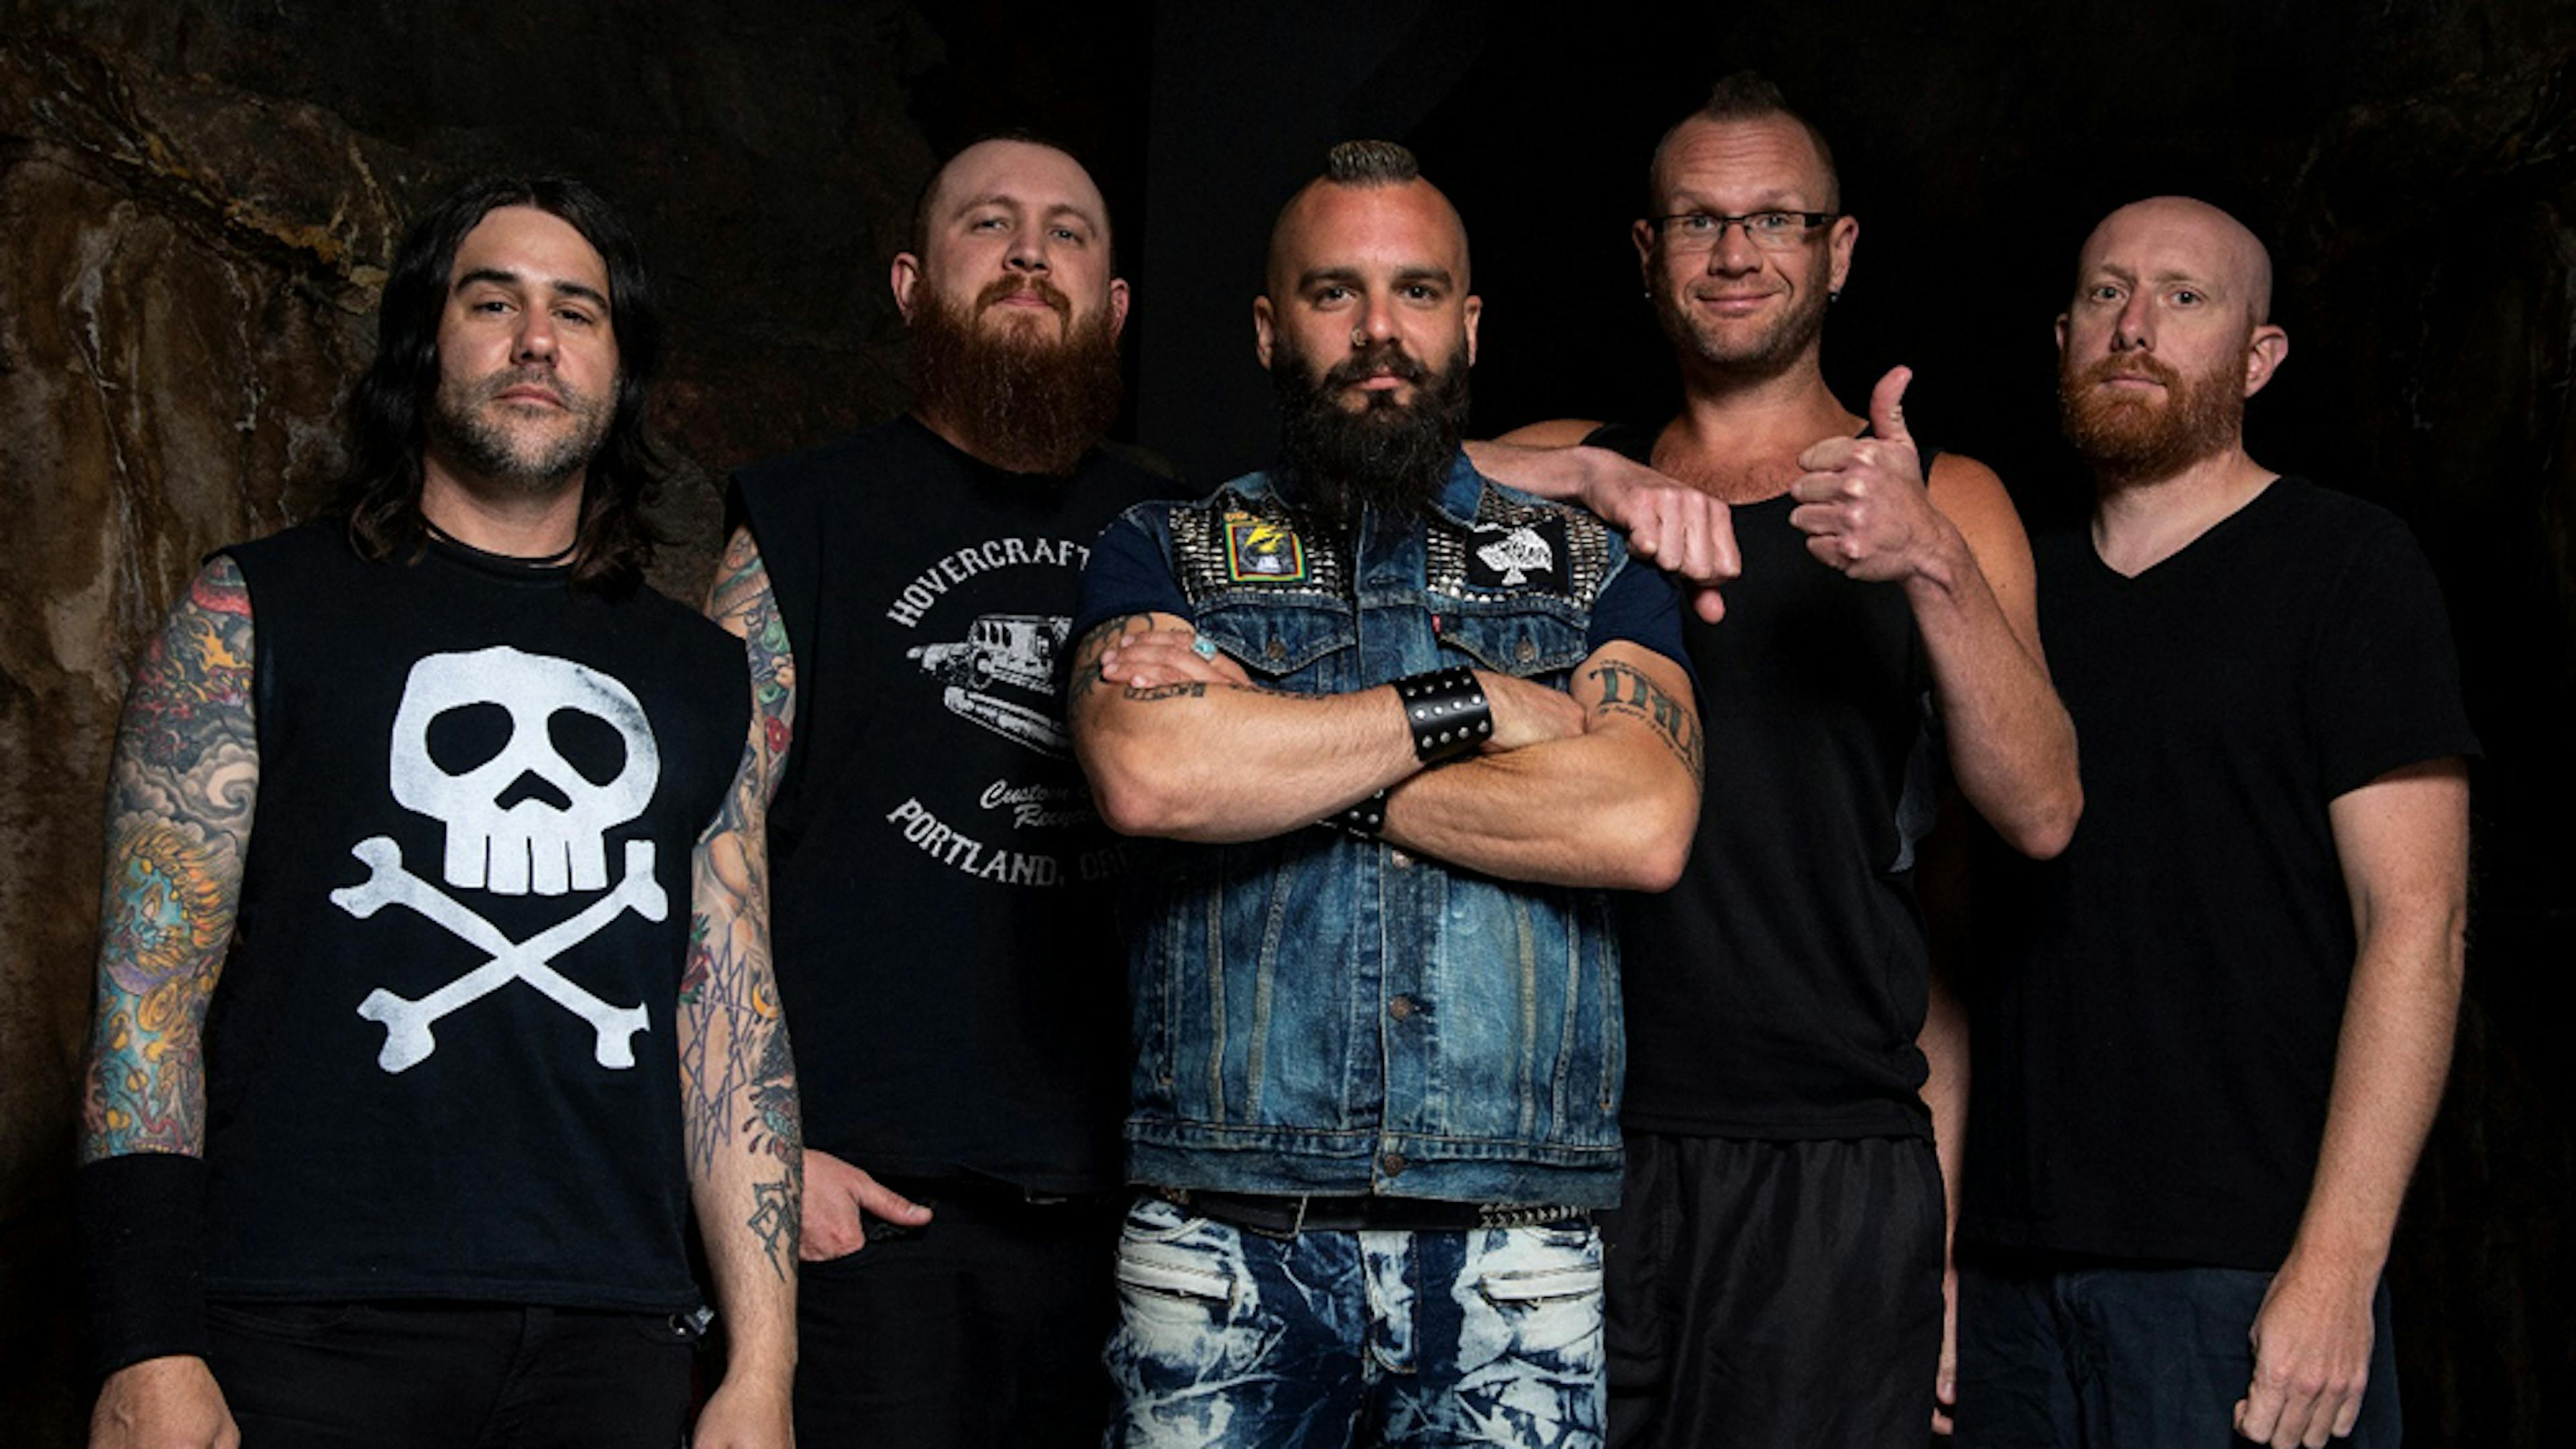 Jesse Leach On The New Killswitch Engage Album: "I Feel There Is Something For Everyone On This One"